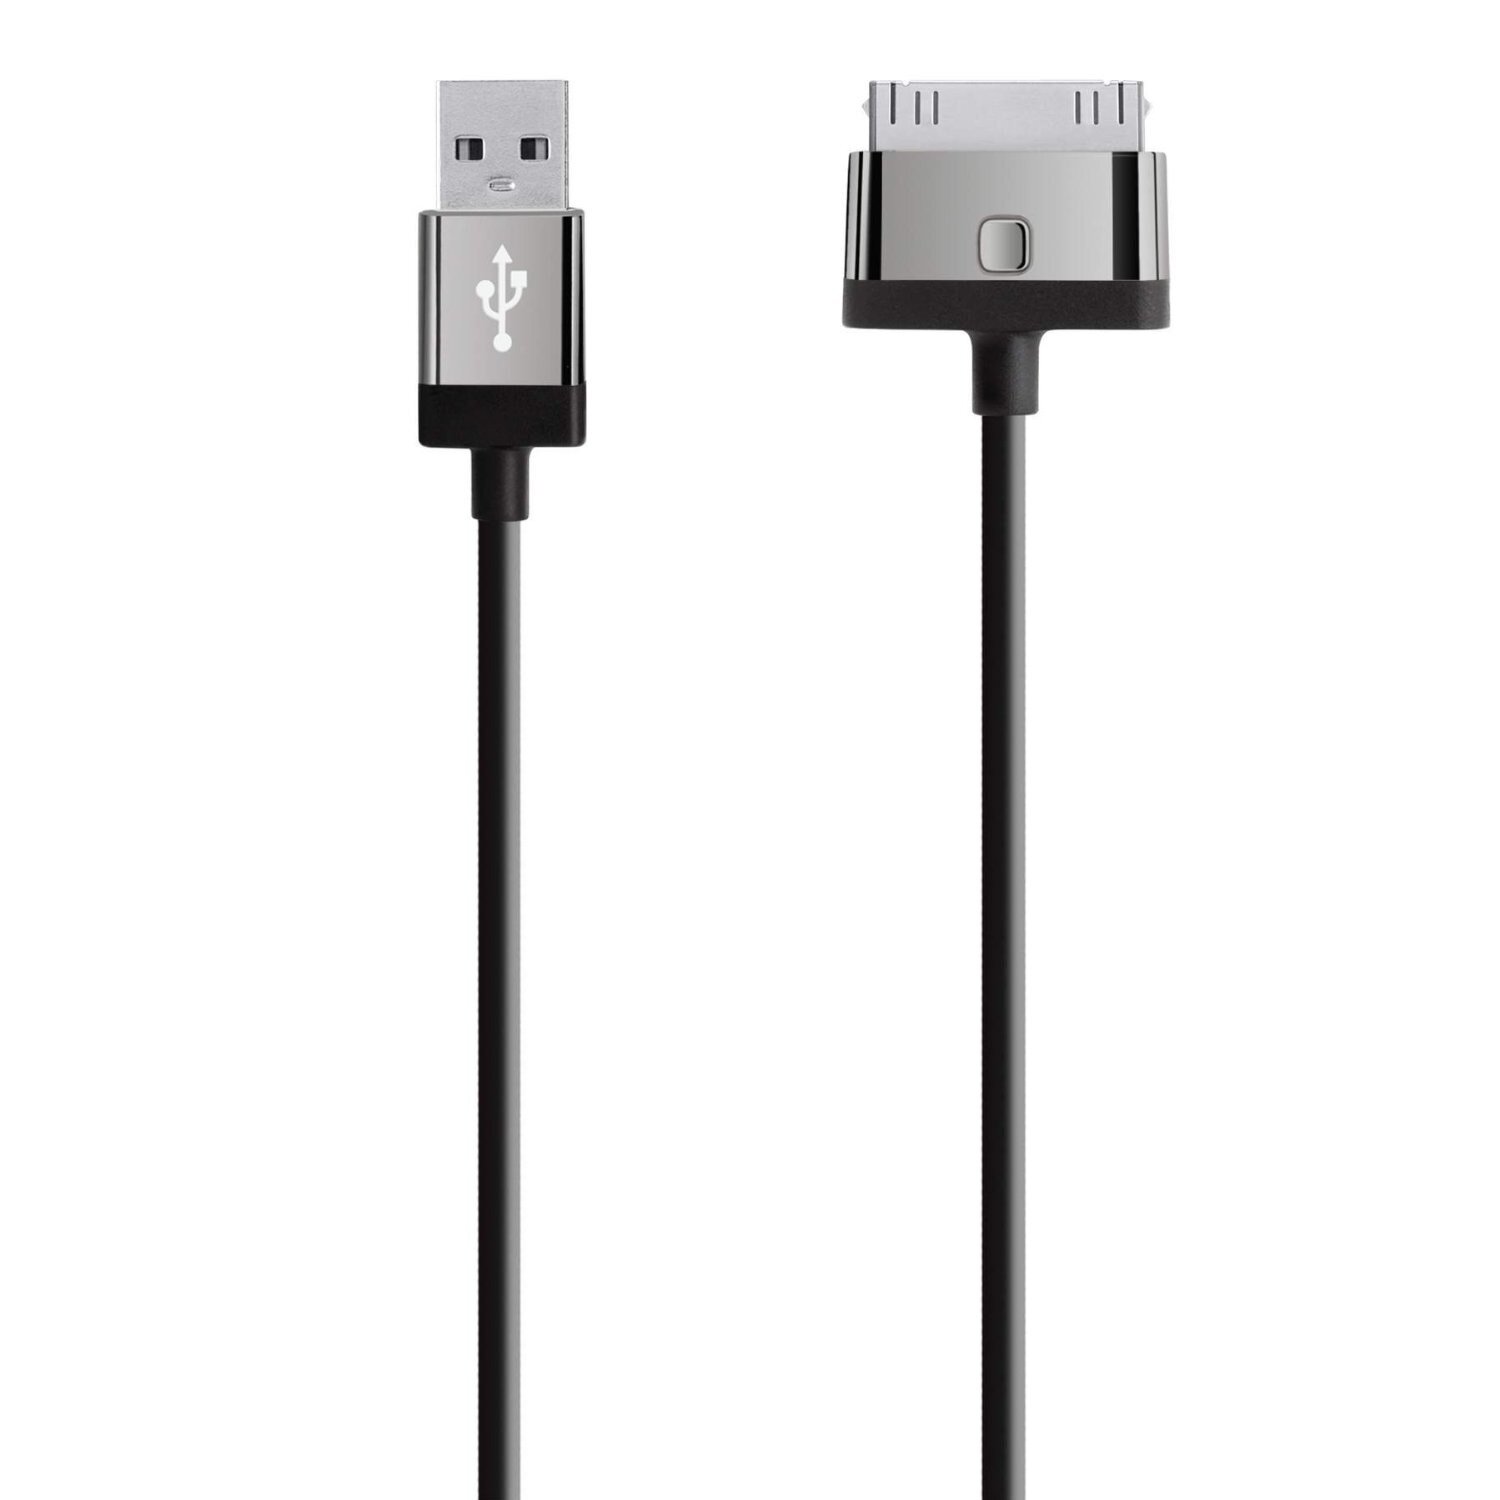 Buy Belkin MIXIT 30-Pin to USB ChargeSync Cable - Black online in ...